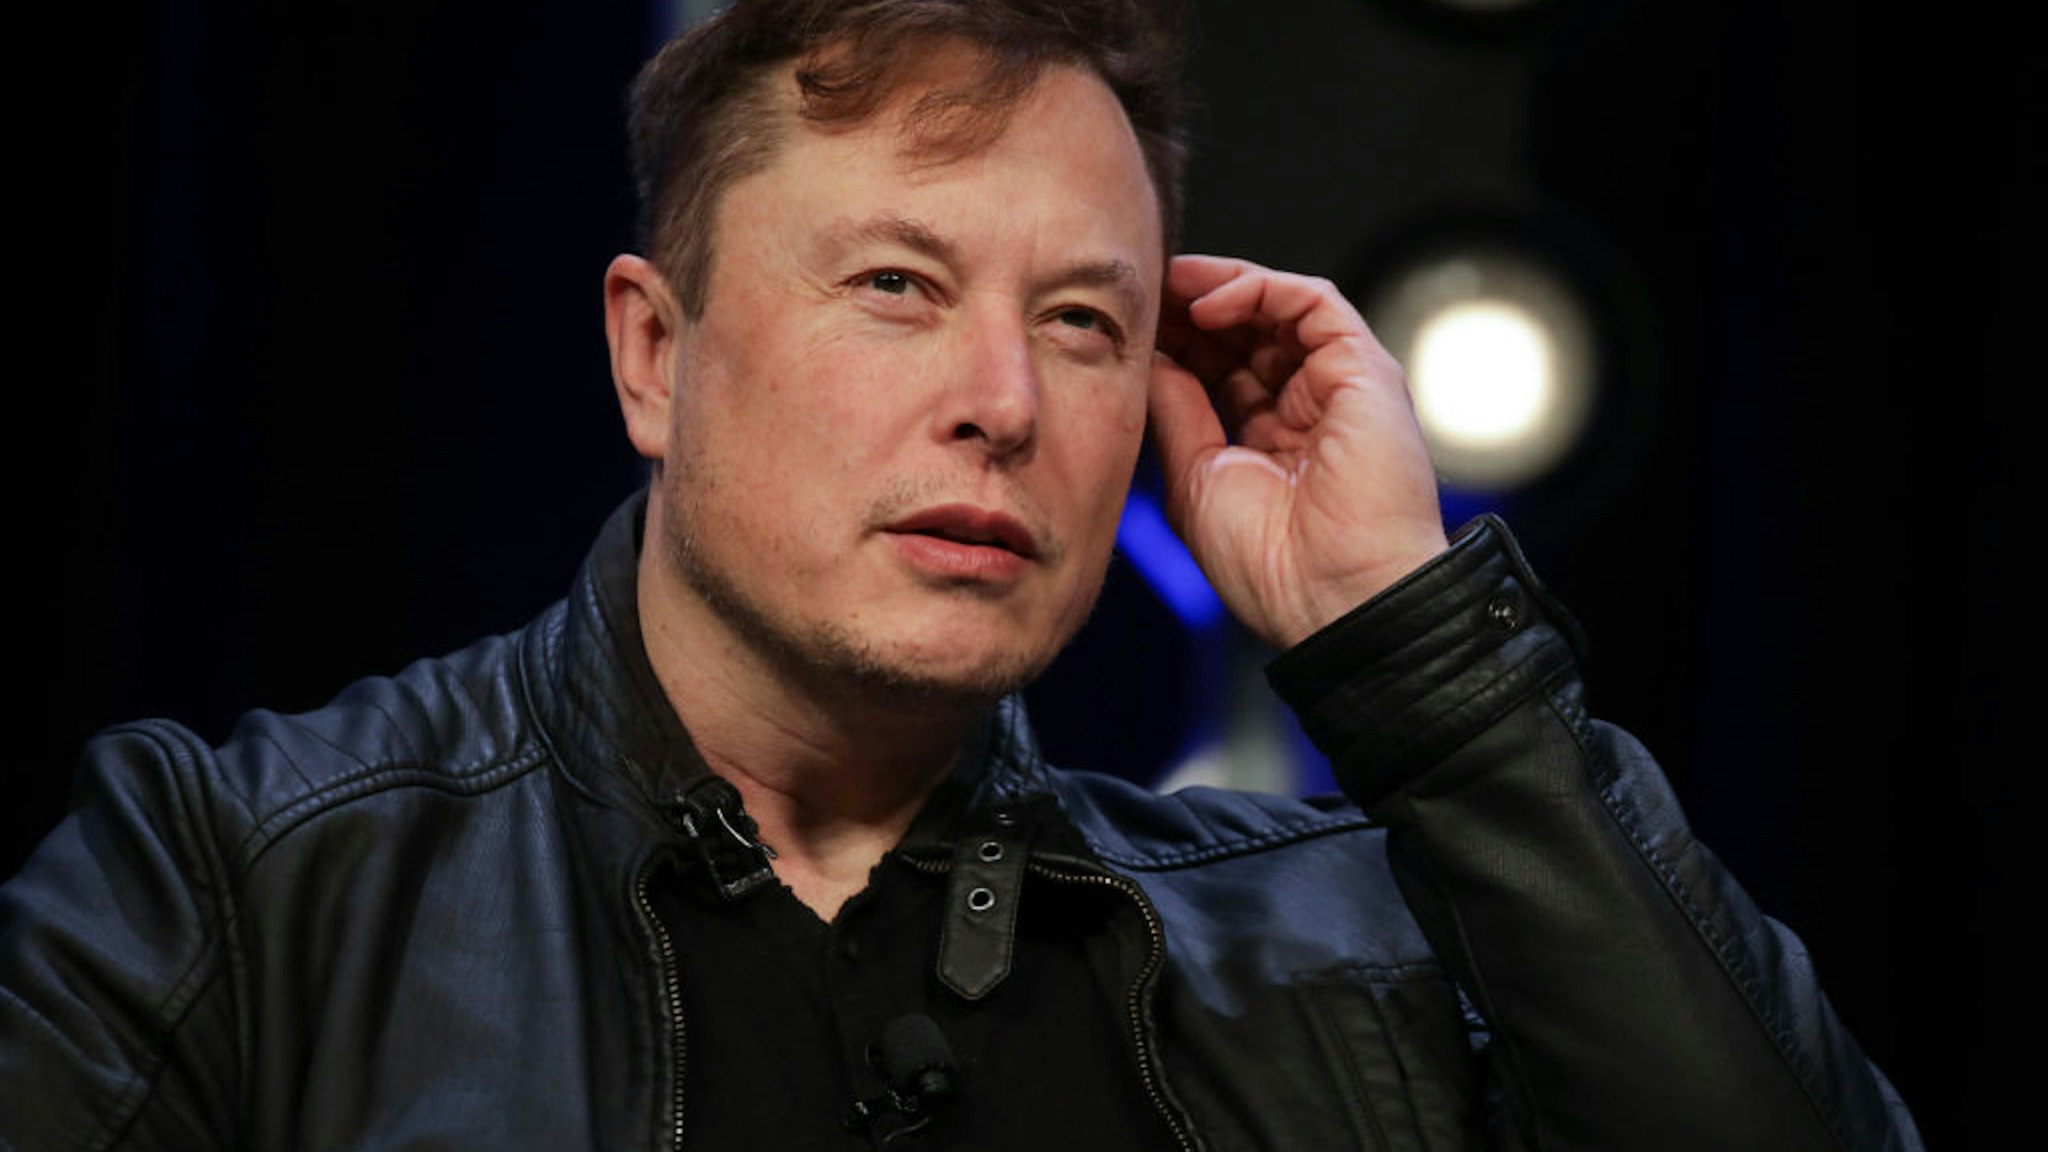 WASHINGTON DC, USA - MARCH 9: Elon Musk, Founder and Chief Engineer of SpaceX, speaks during the Satellite 2020 Conference in Washington, DC, United States on March 9,